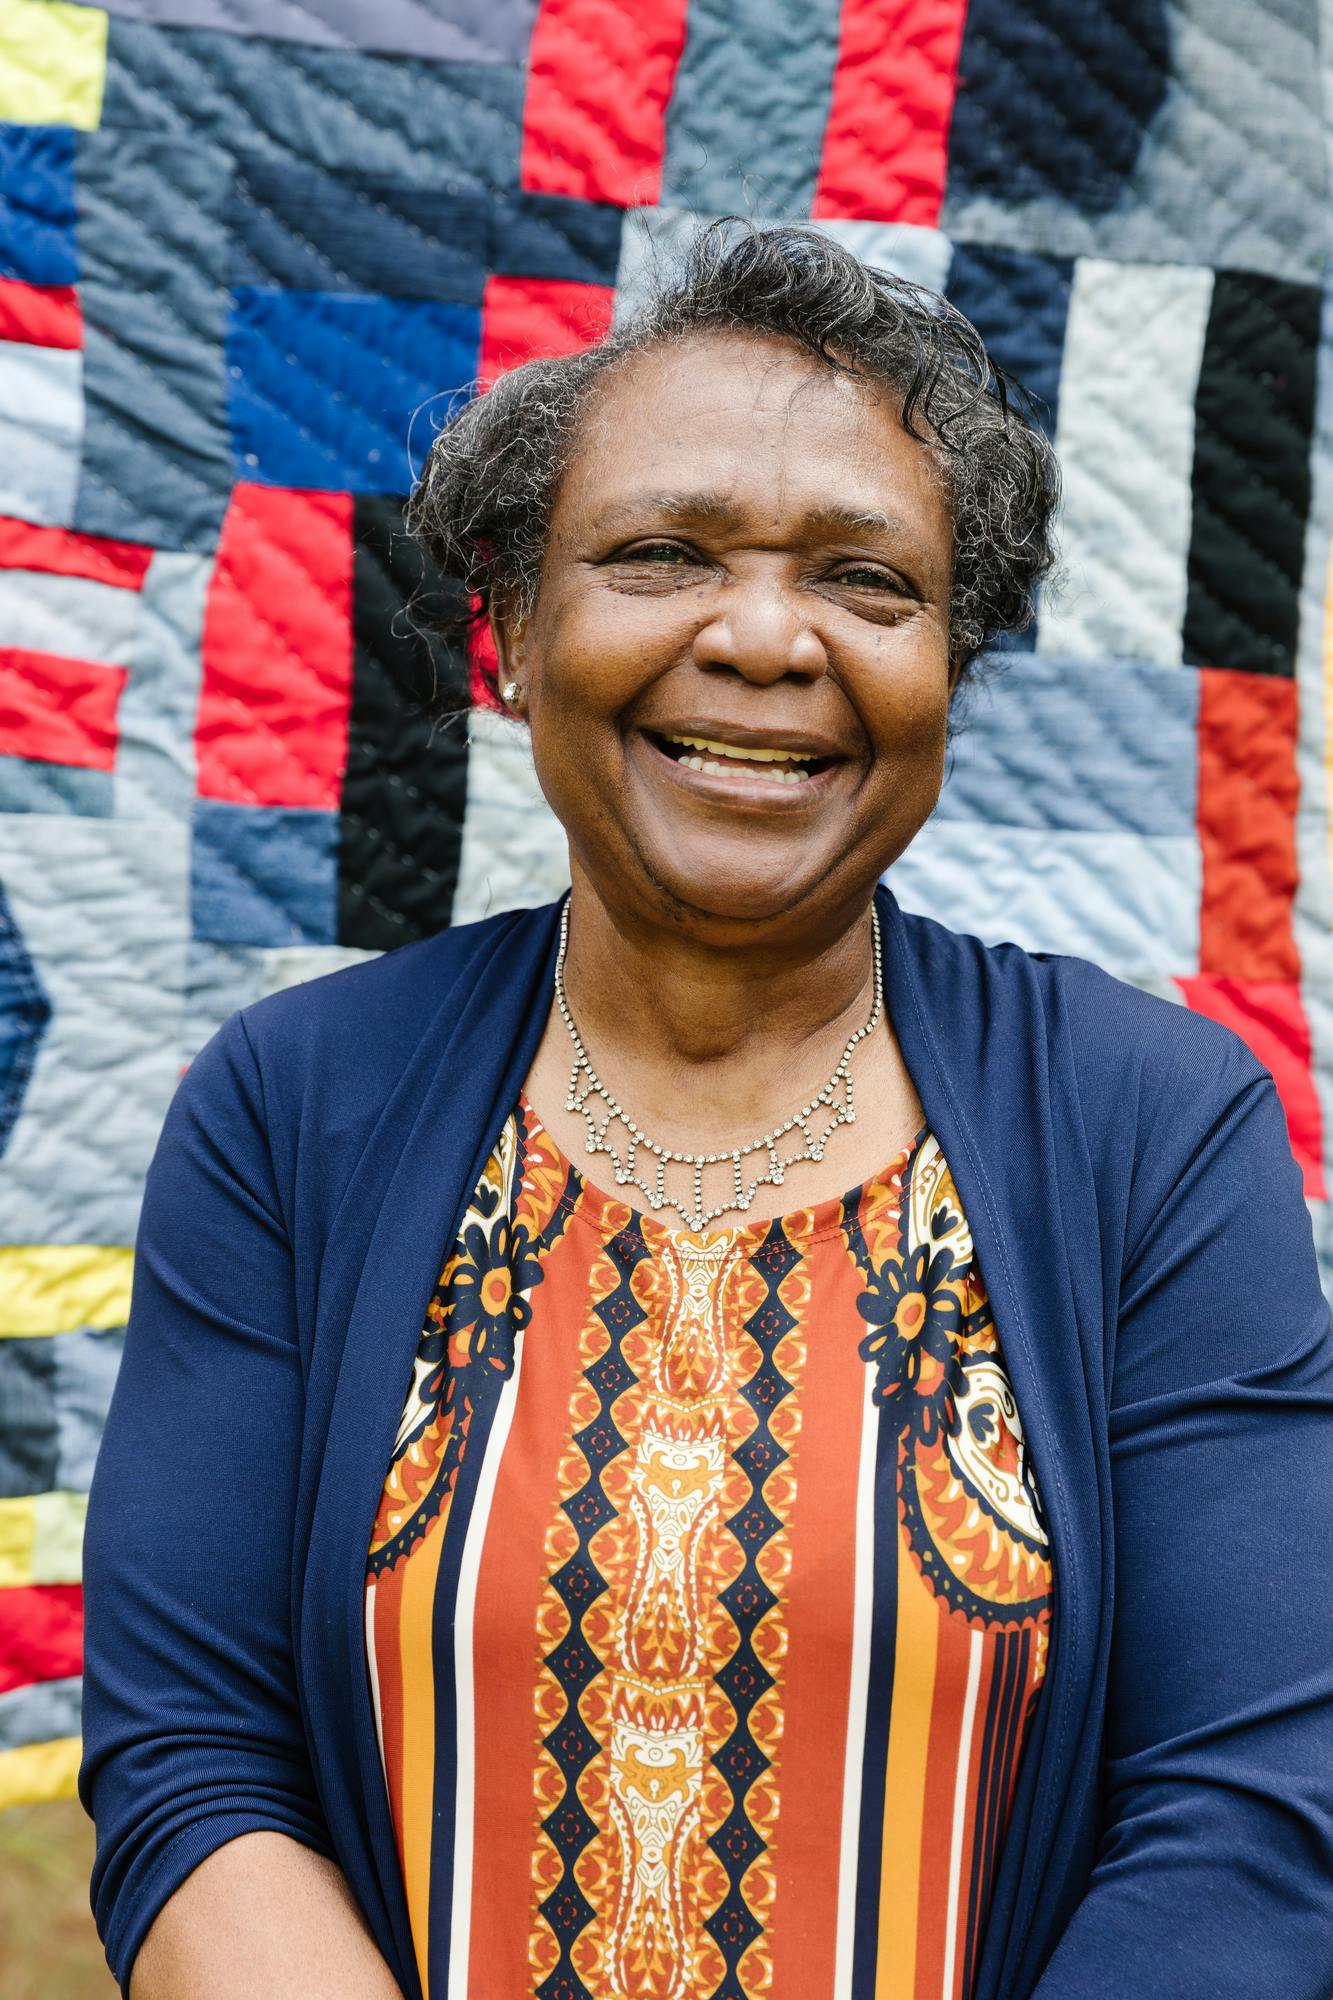 Portrait of textile artist stella mae pettway smiling in front of blue and red quilt